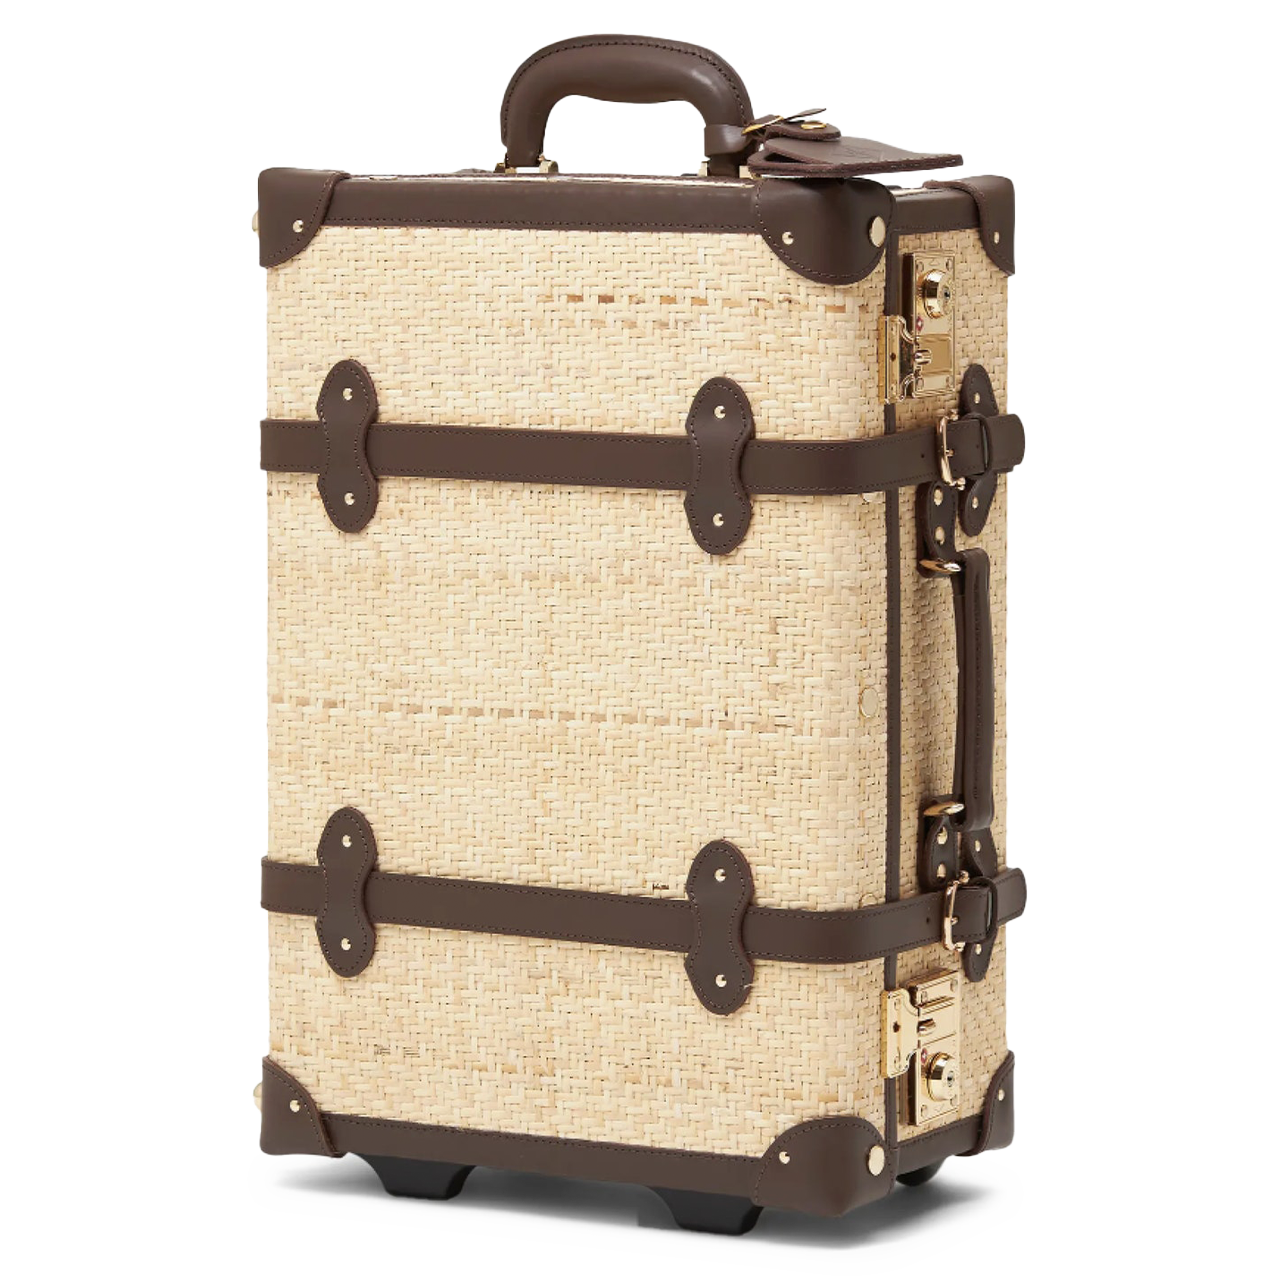 Steamline Luggage Explorer 20-inch rattan rolling carry-on